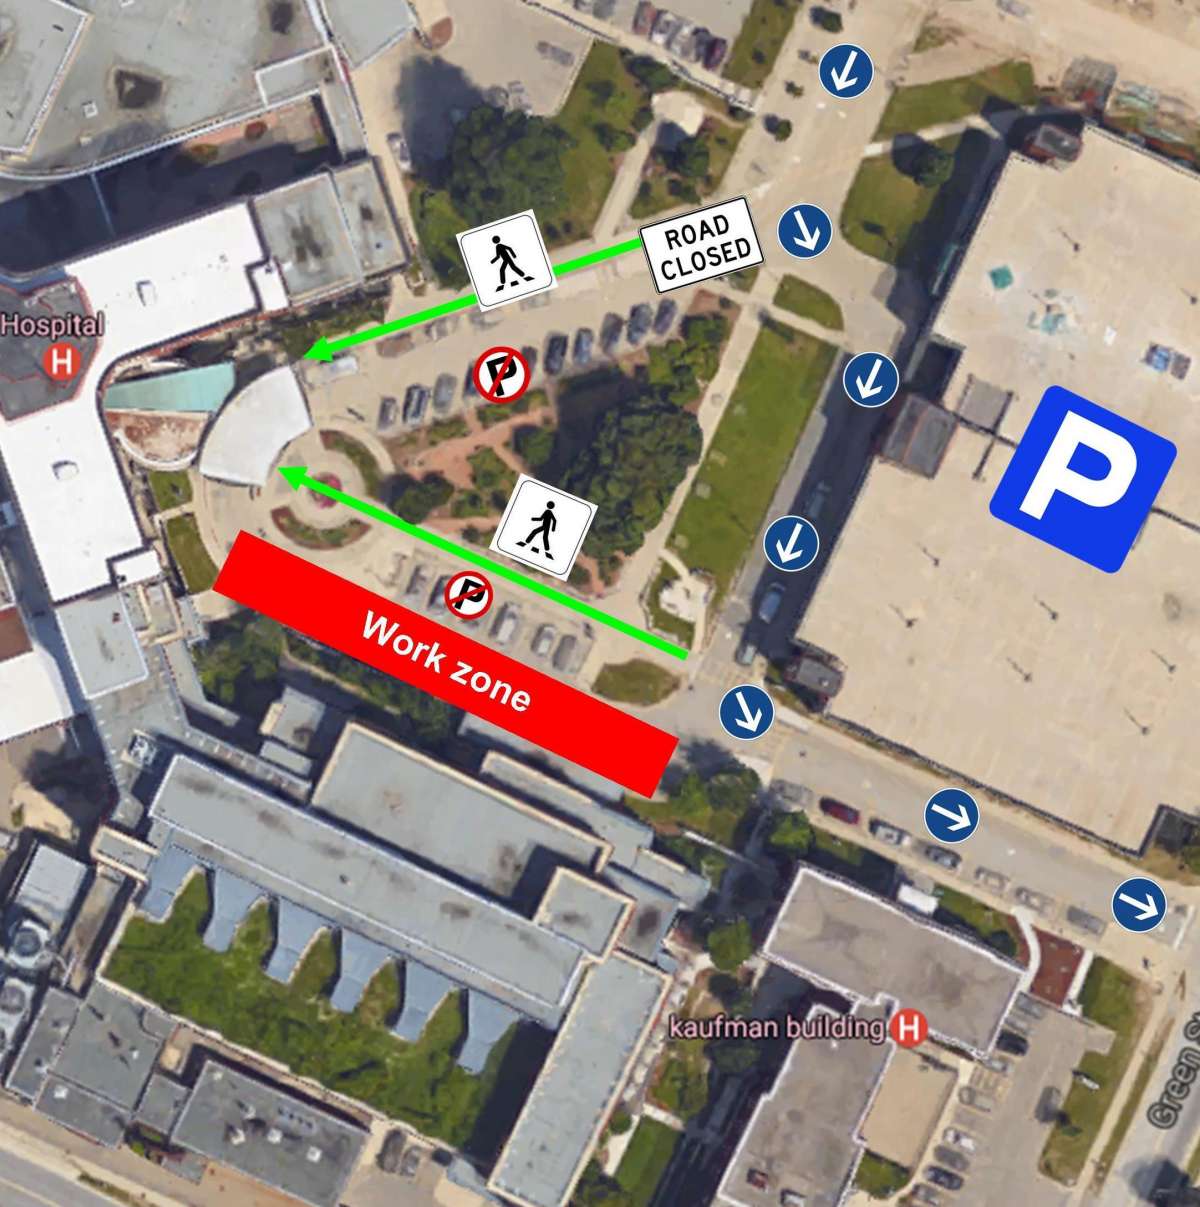 A map showing the closed main driveway at the KW Campus on Sunday January 29th. Vehicles will be re-routed. Pedestrians will still be able to access the main entrance of the hospital.